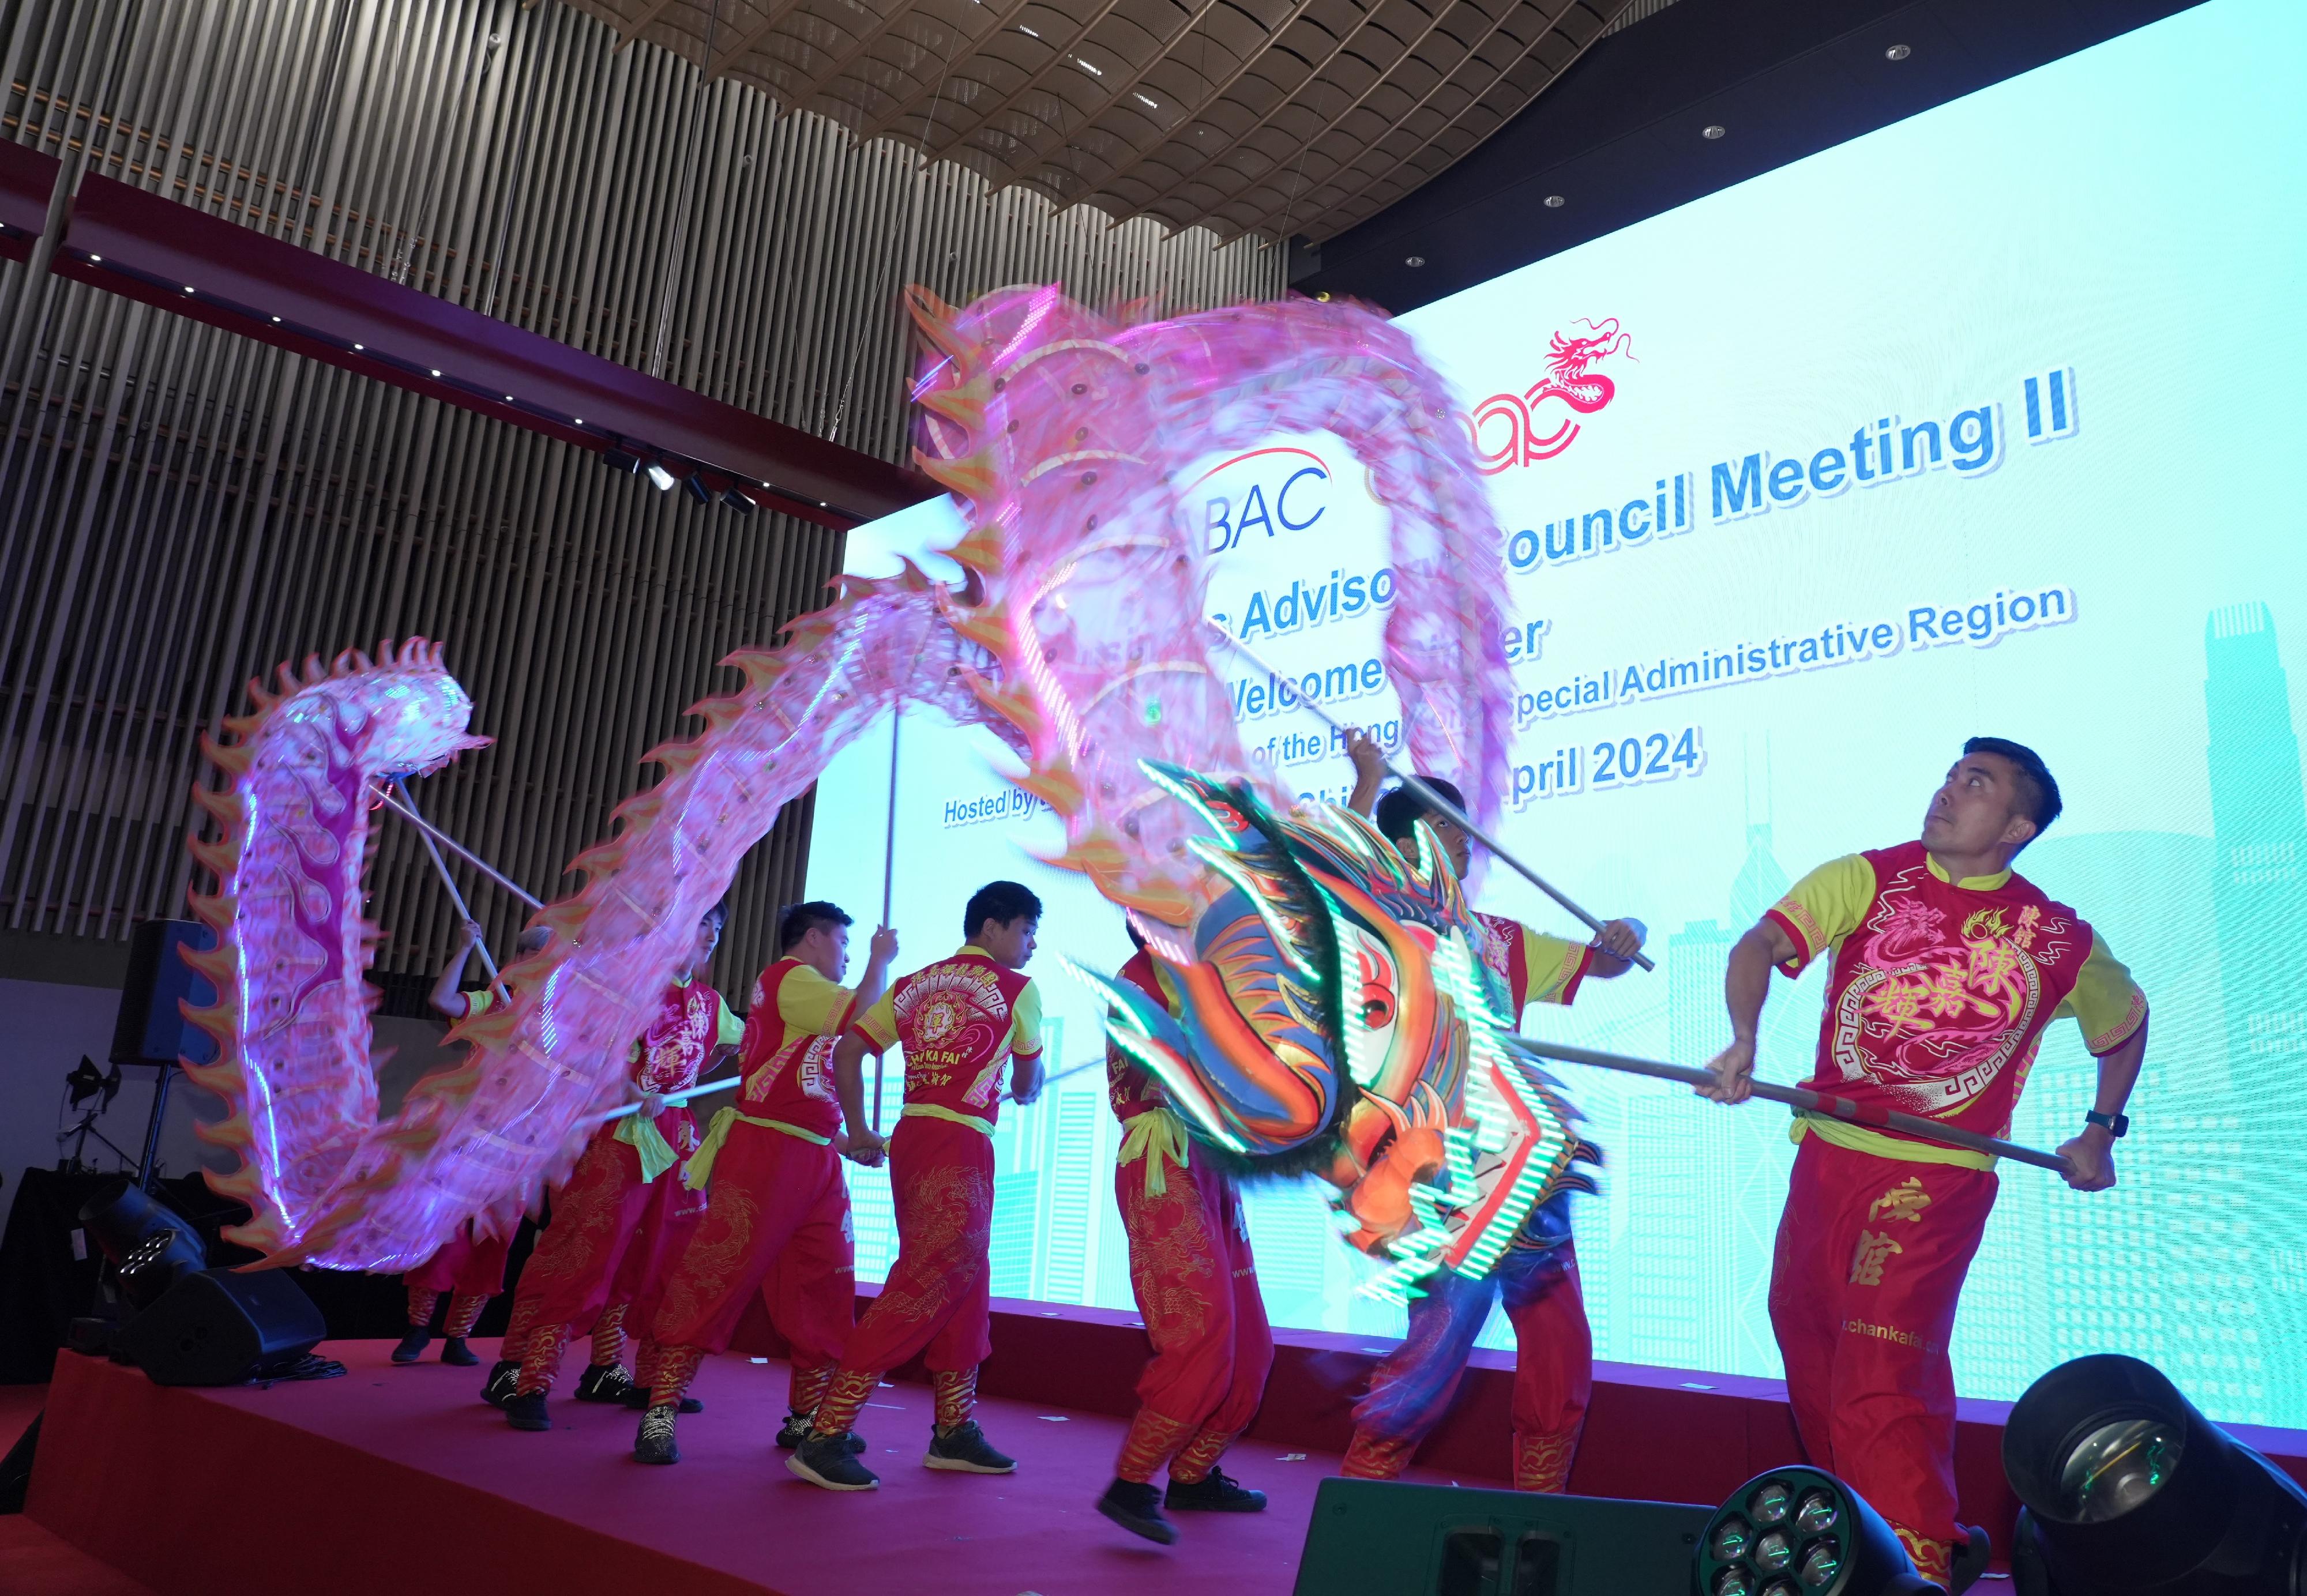 The Chief Executive, Mr John Lee, today (April 23) hosted a welcome dinner for the Asia-Pacific Economic Cooperation Business Advisory Council (ABAC) delegates attending the second 2024 ABAC Meeting in Hong Kong. Photo shows an LED dragon dance performance at the dinner.